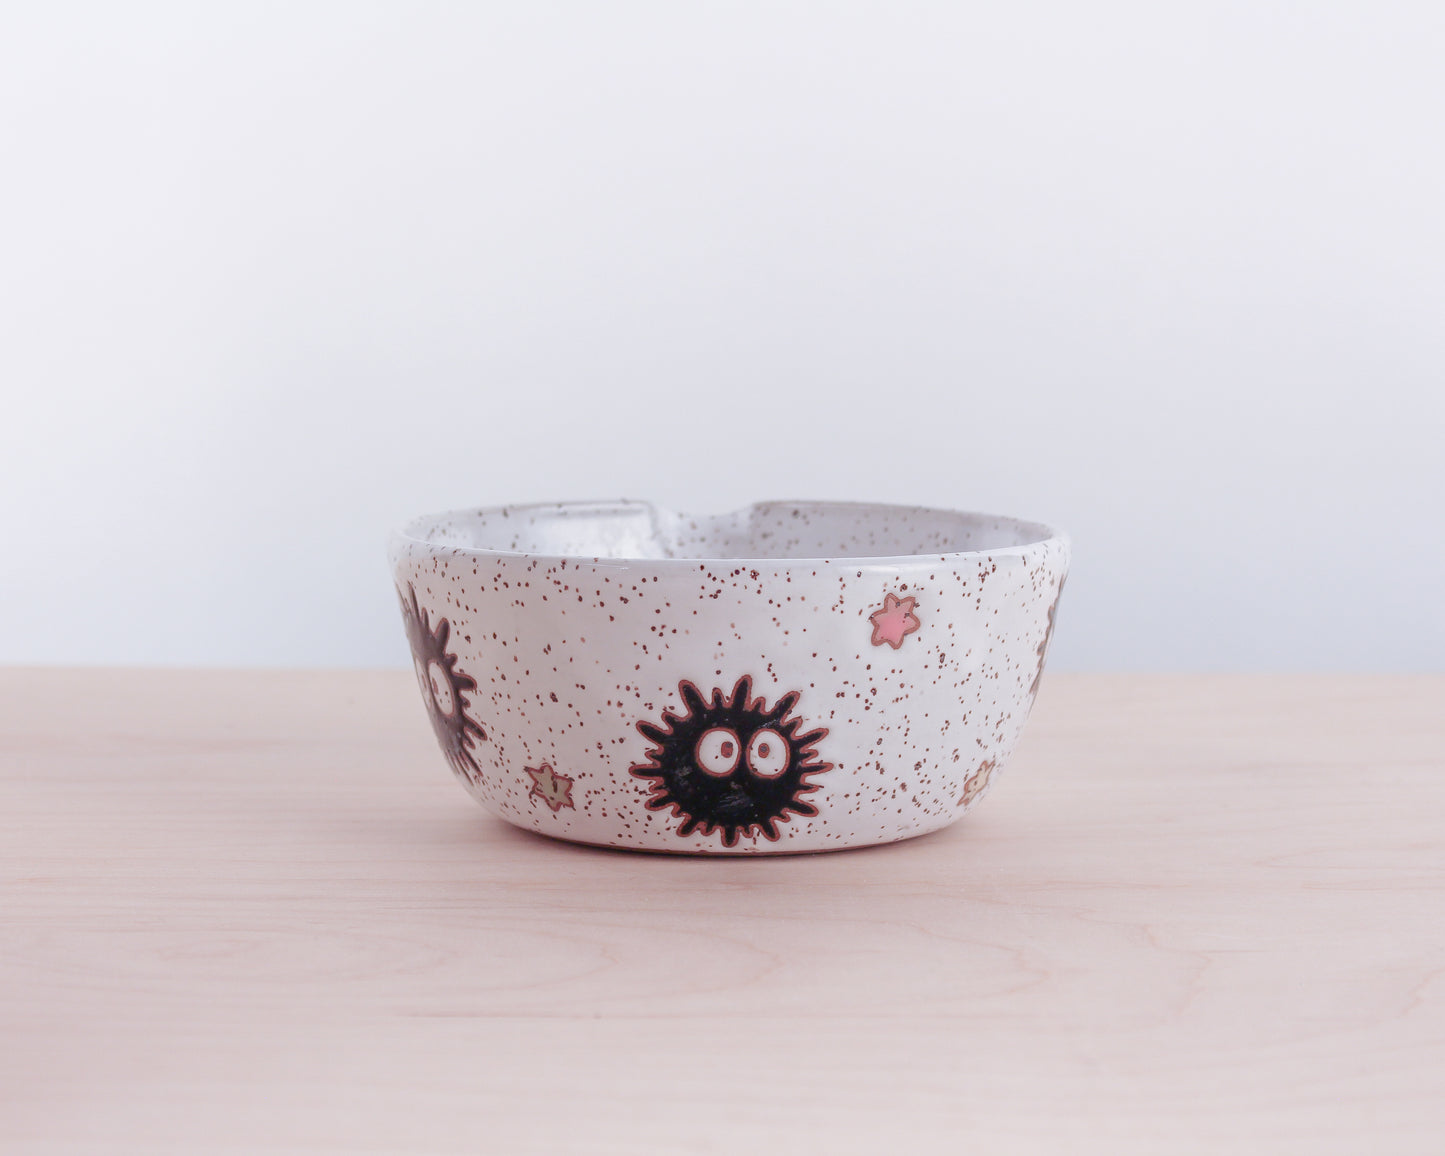 Soot Sprite Spouted Bowl